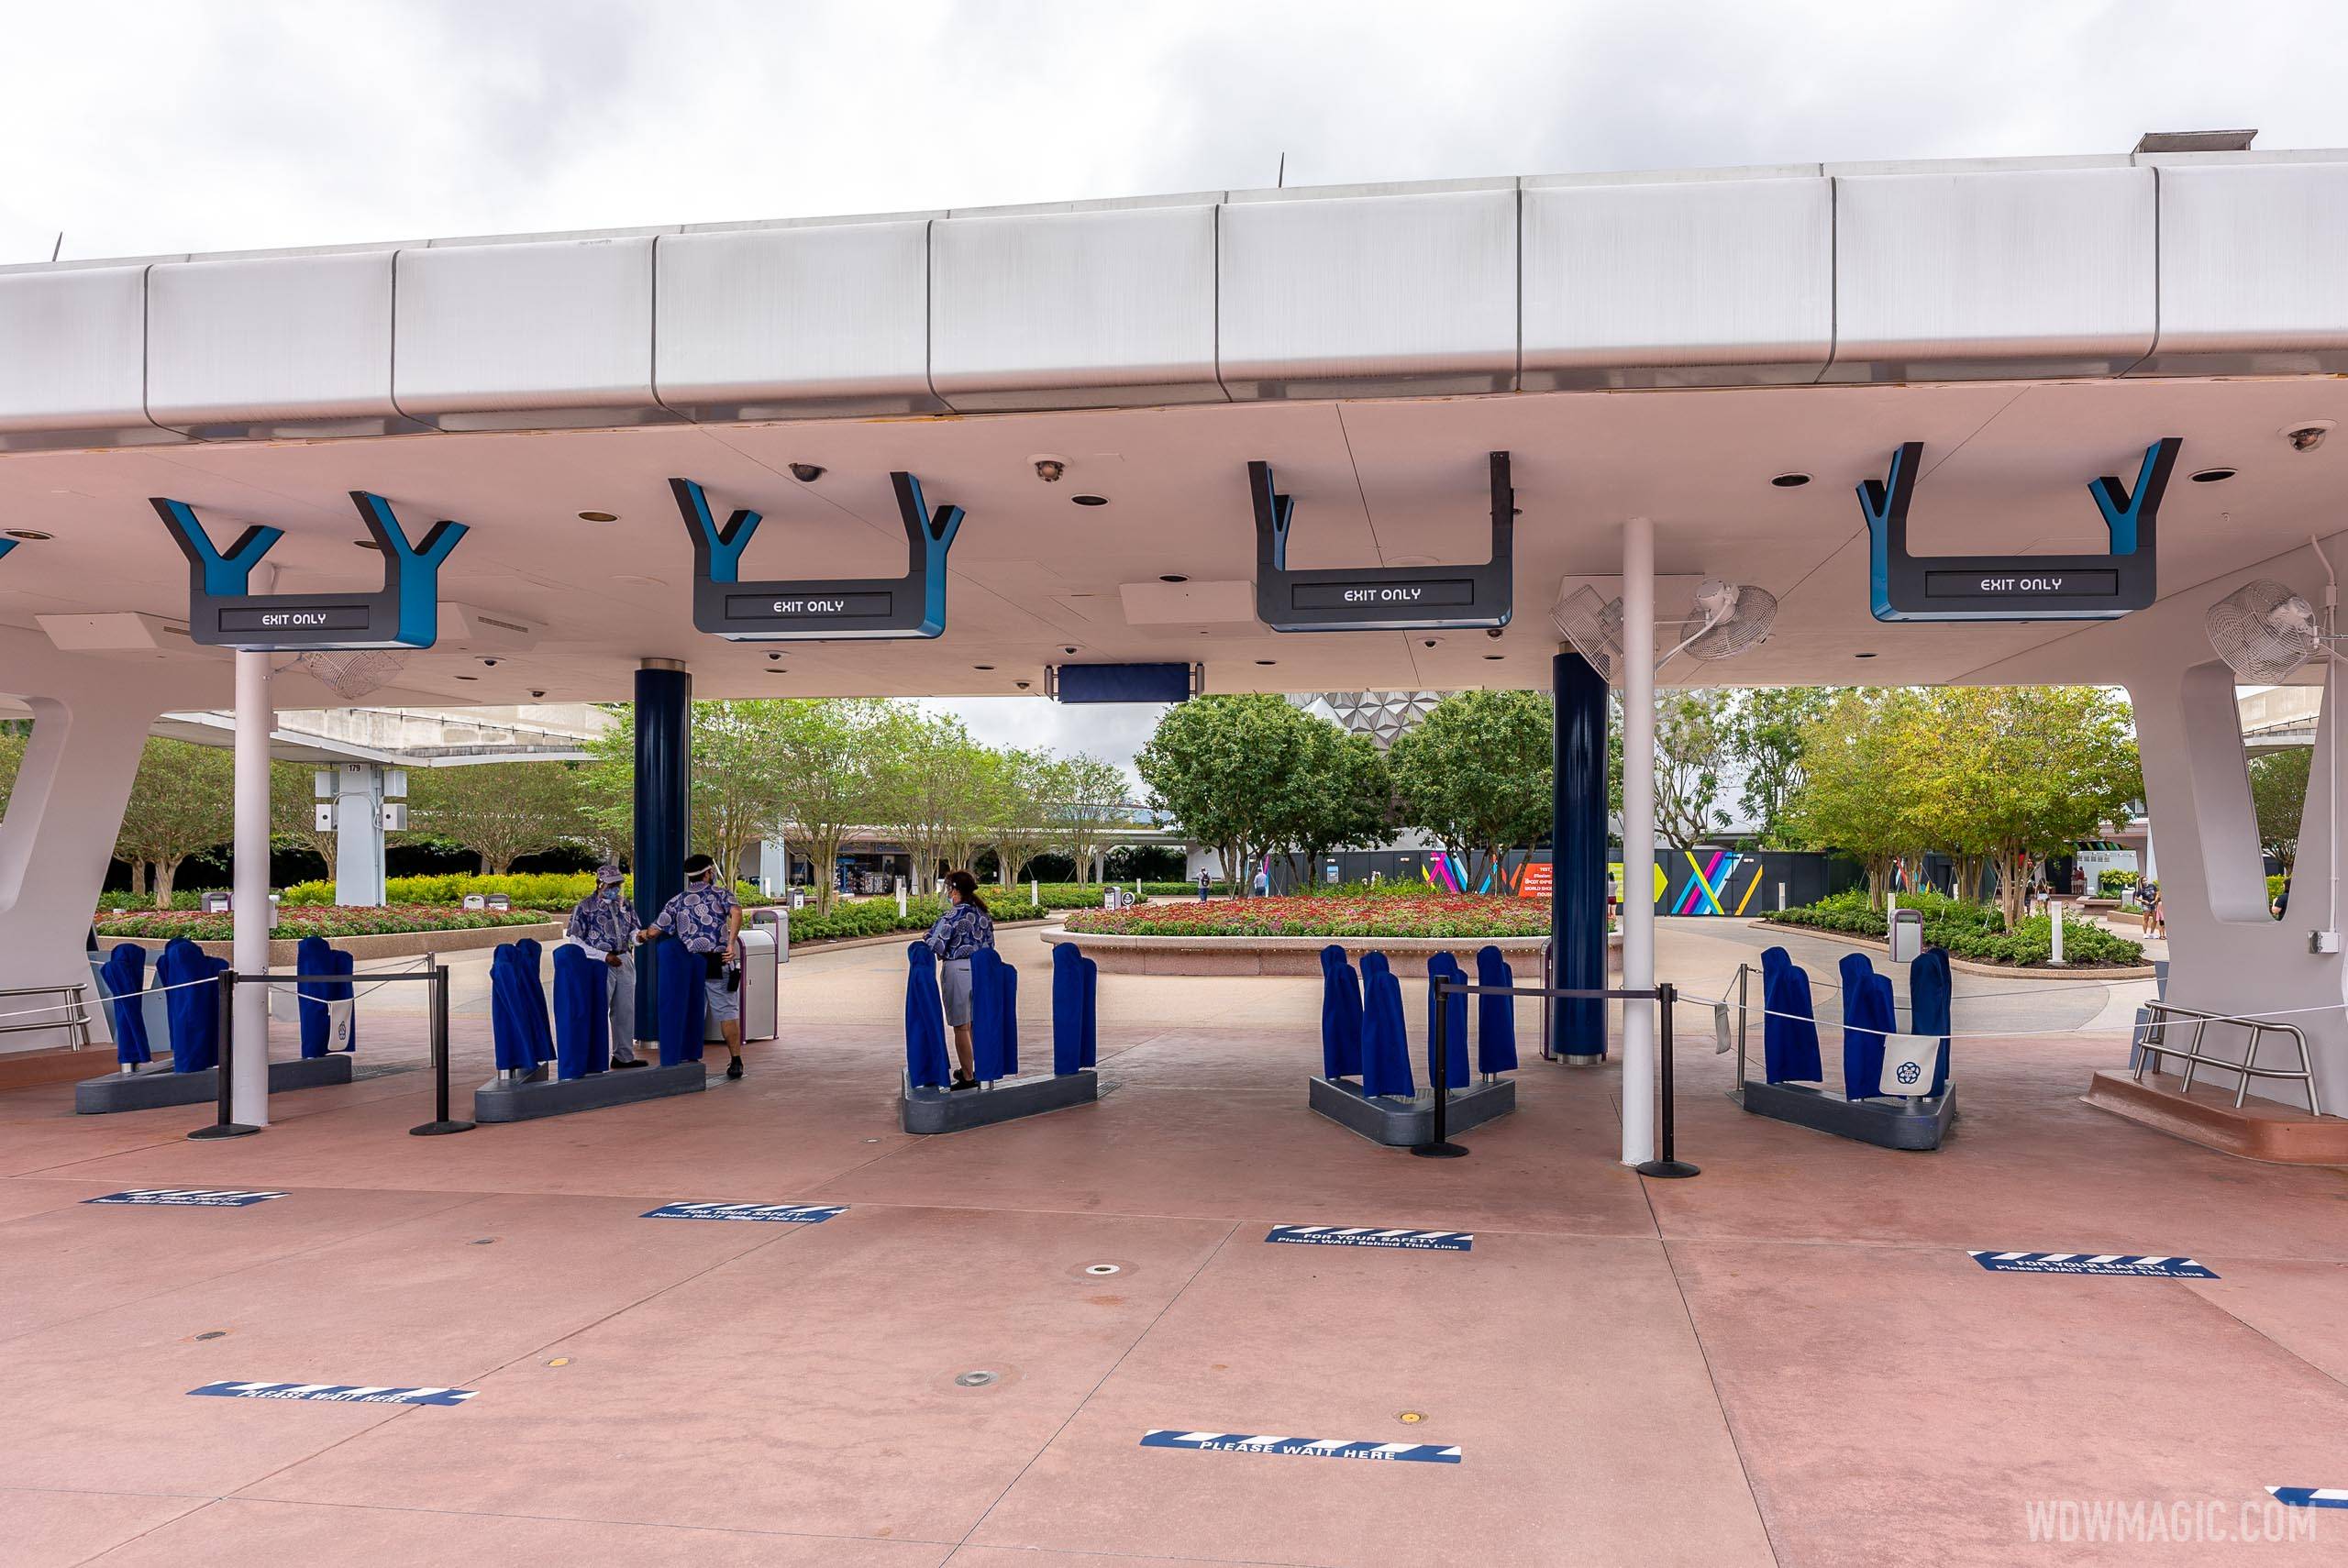 EPCOT's new tapstyle entrance signs